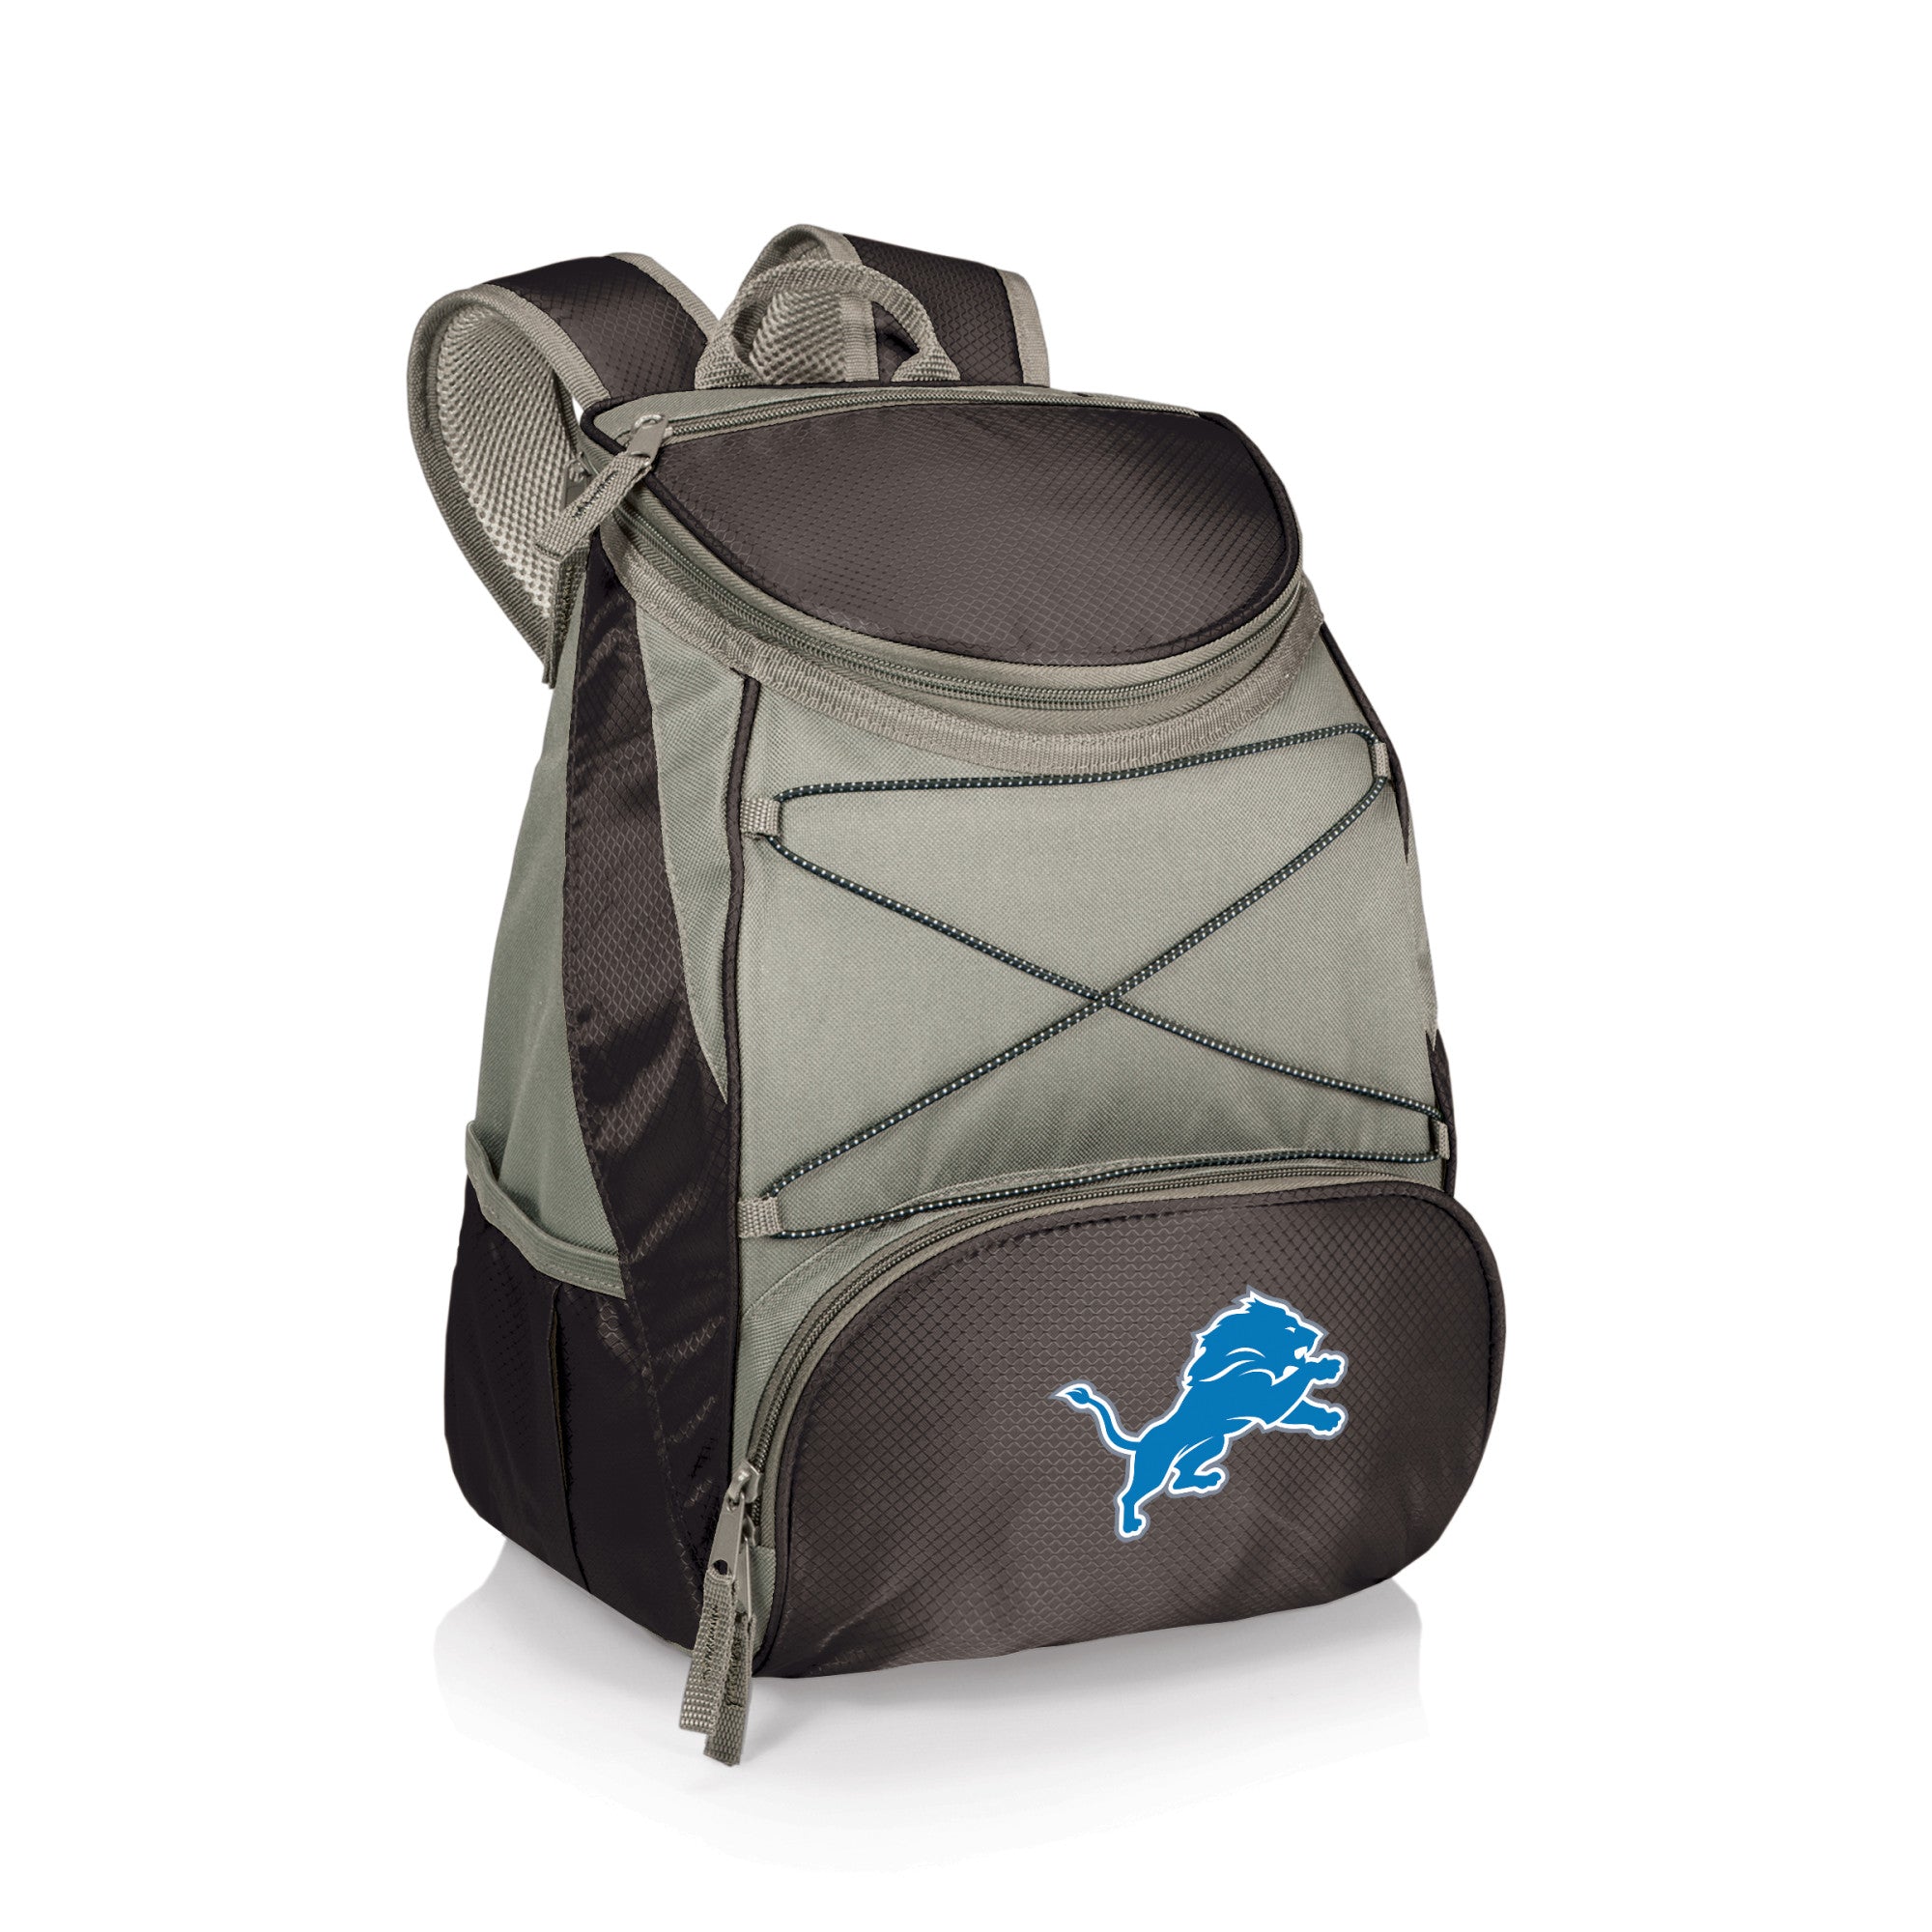 Detroit Lions - PTX Backpack Cooler, (Black with Gray Accents)